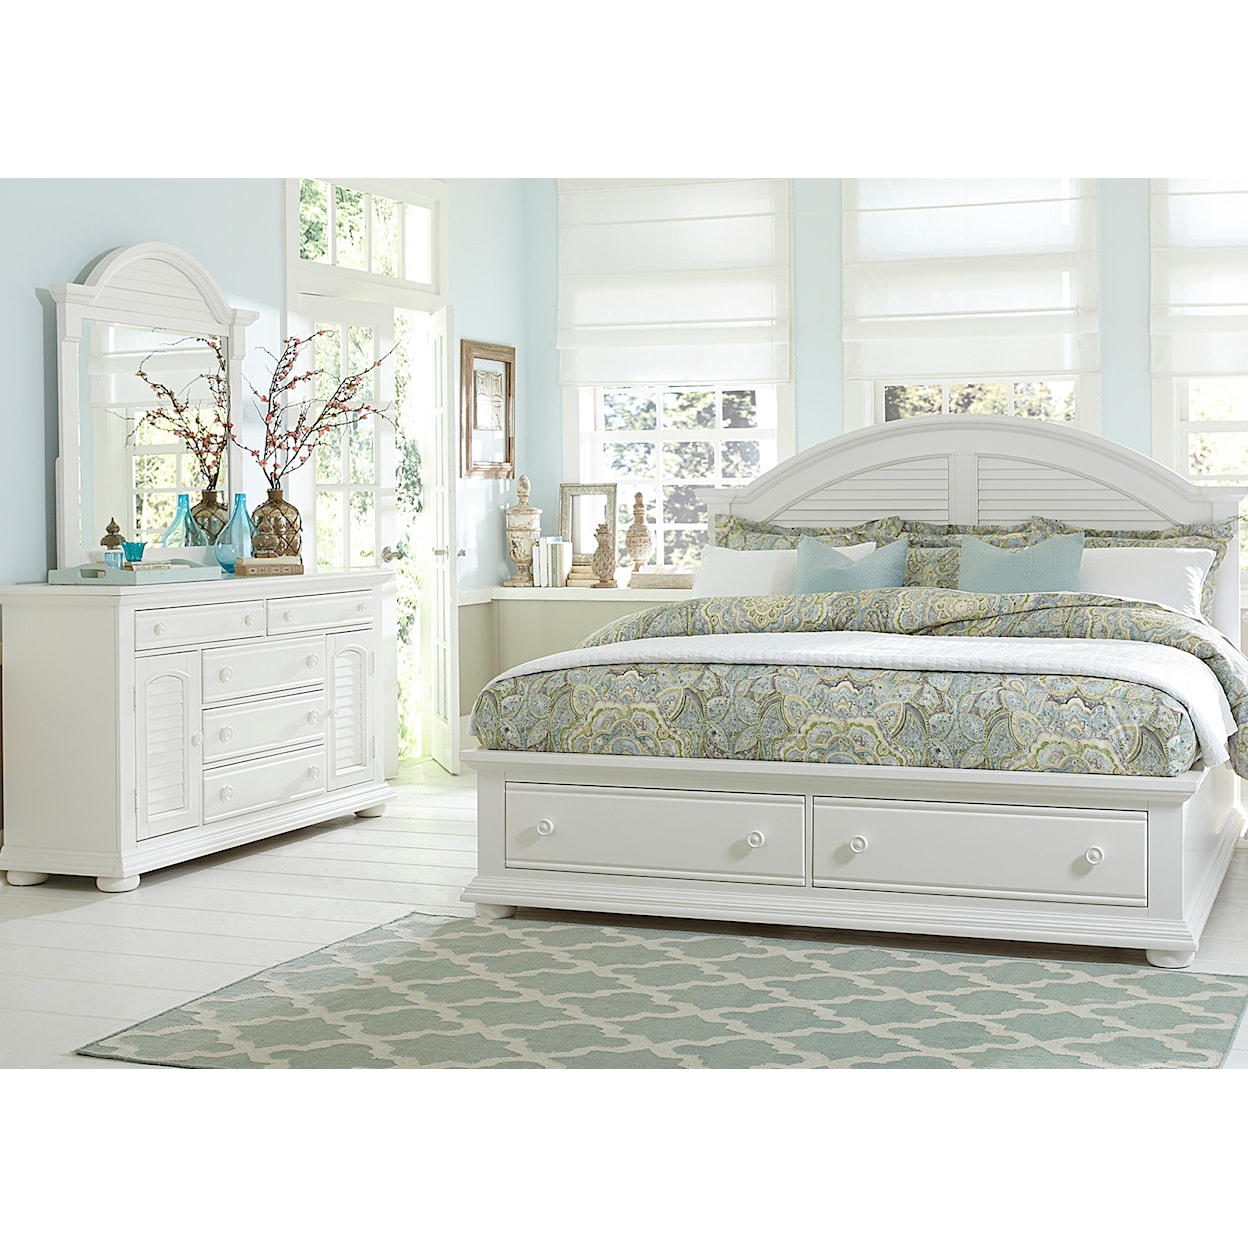 Libby Summer House Queen Bedroom Group